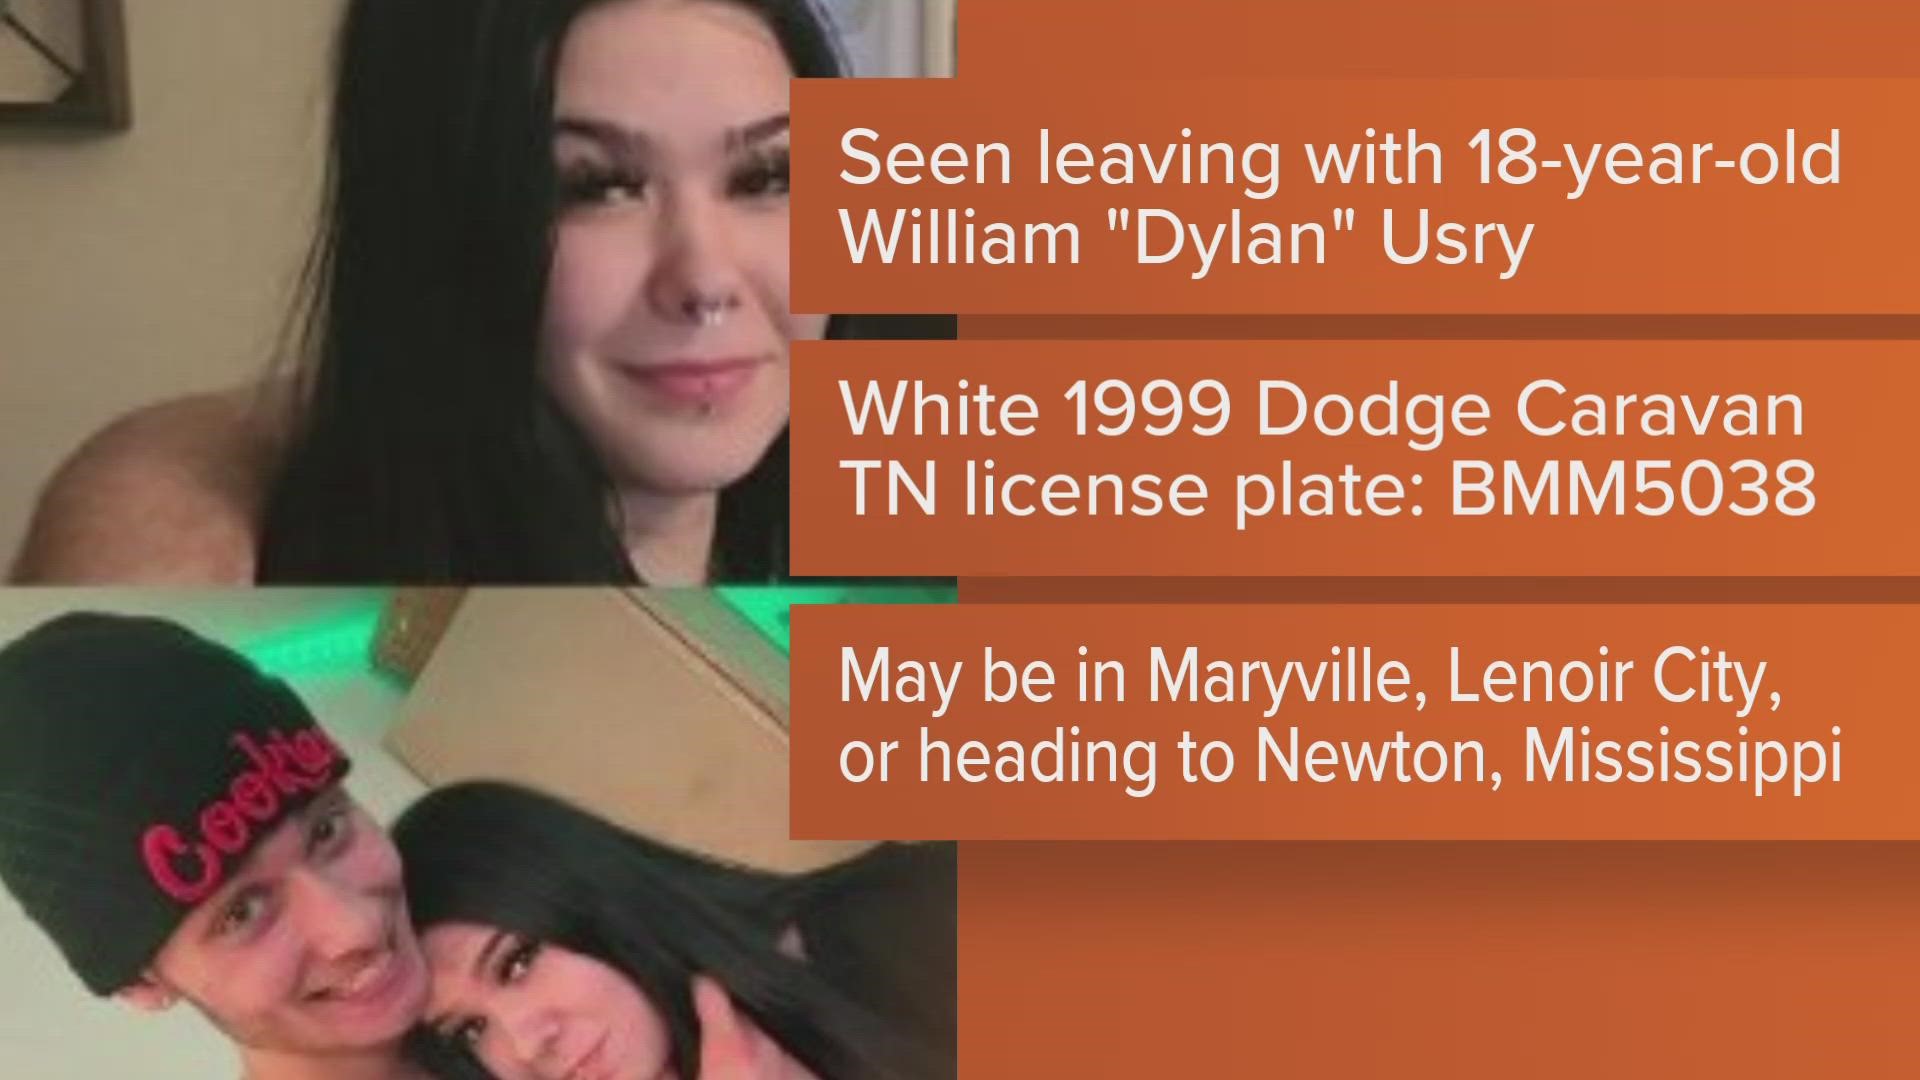 According to the BCSO, 16-year-old Holly Piper was last seen on February 19.